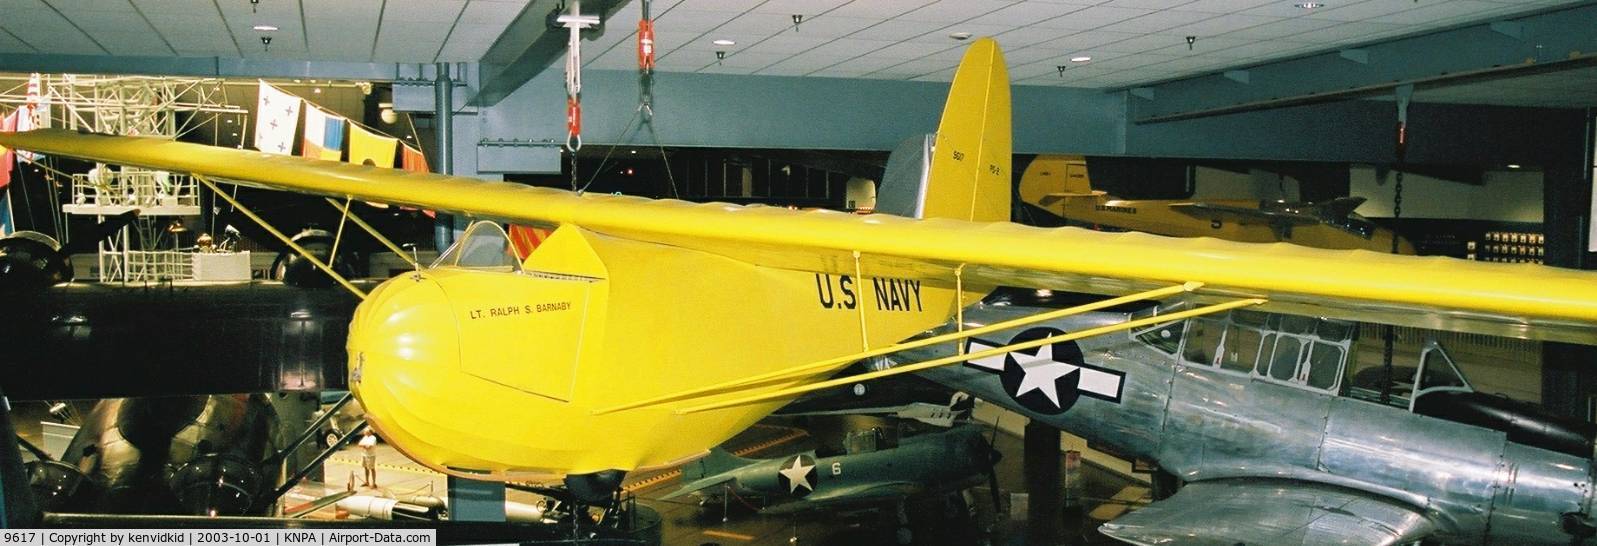 9617, 1934 Franklin PS-2 C/N 126, On display at the Museum of Naval Aviation, Pensacola.